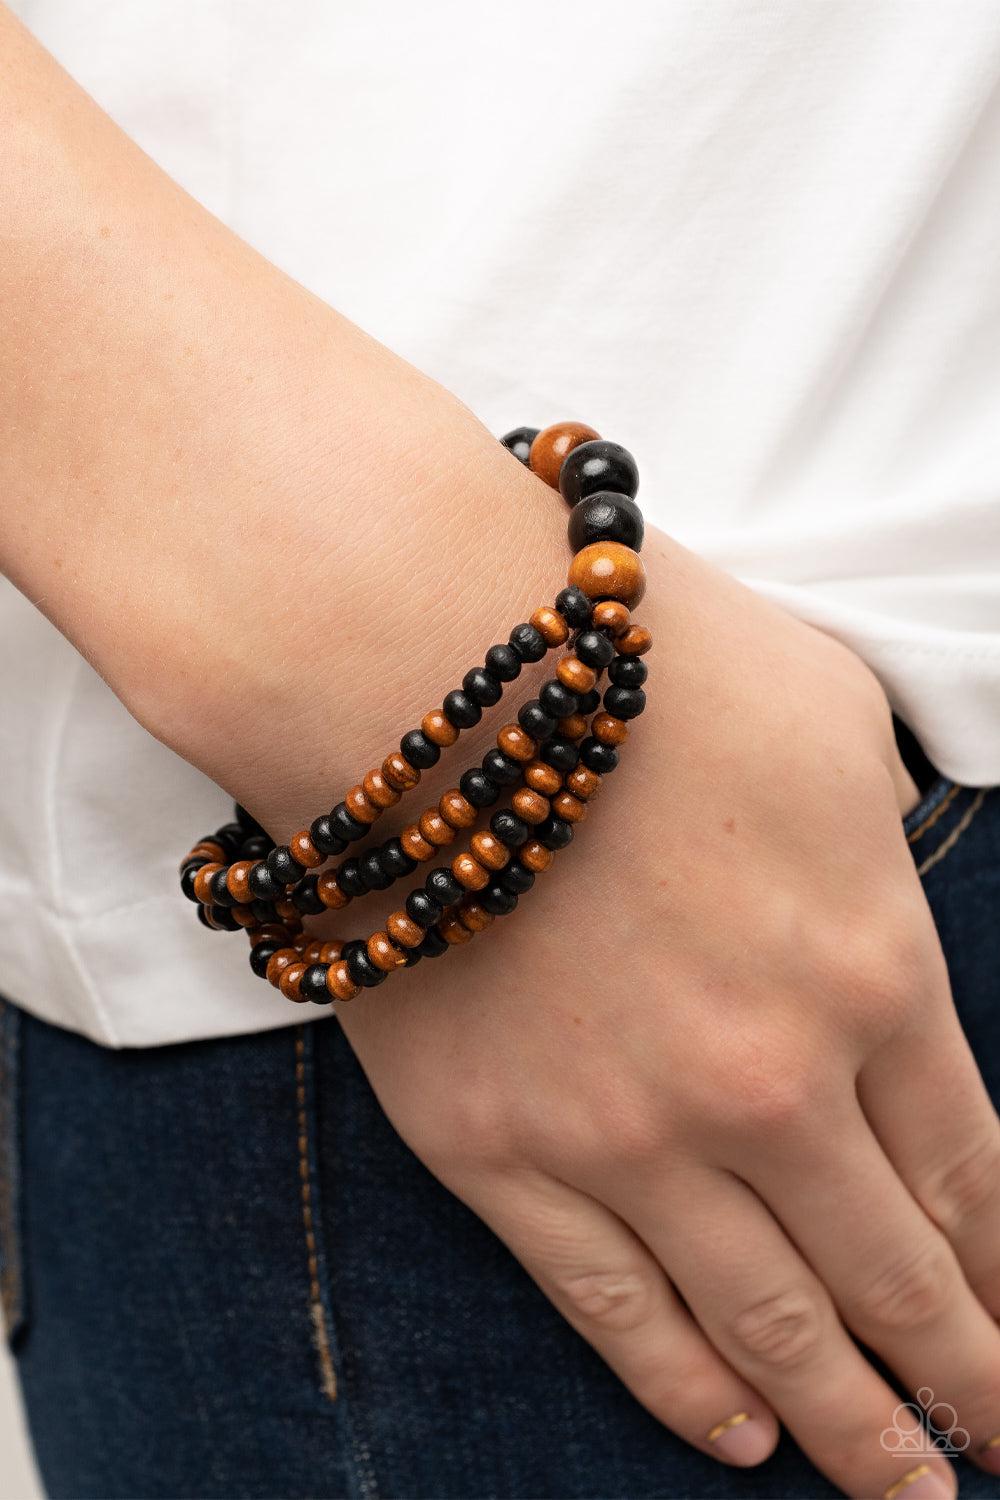 Oceania Oasis Black & Brown Wood Bracelet - Paparazzi Accessories- lightbox - CarasShop.com - $5 Jewelry by Cara Jewels